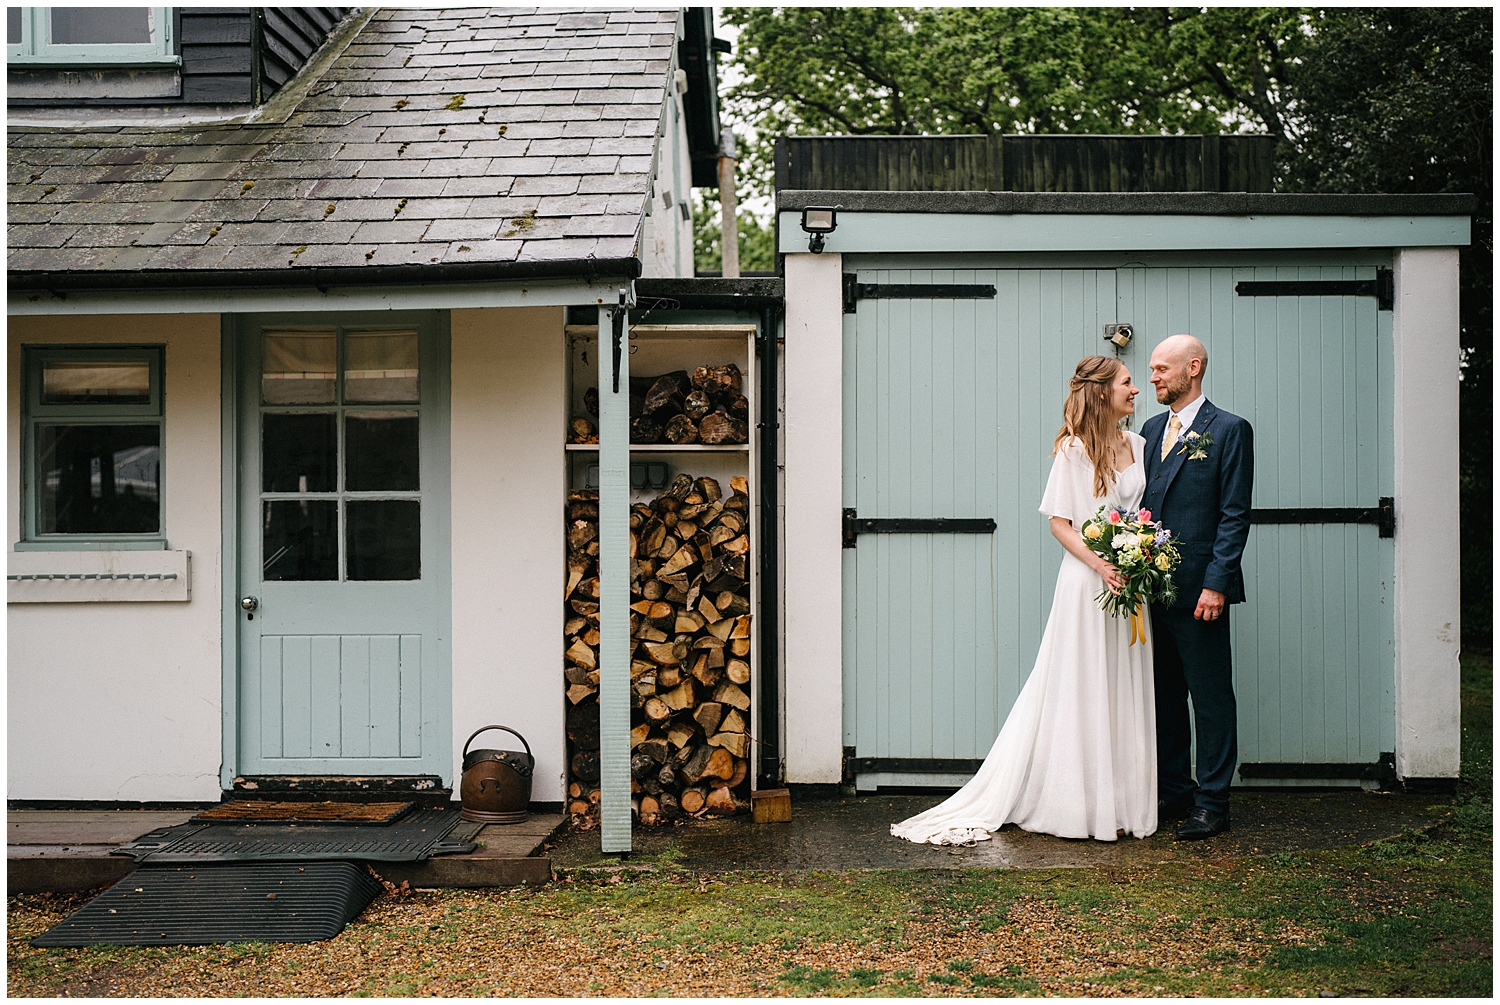 A couple during their rainy wedding at Tournerbury Woods, Hayling Island. Photographed by Kari Bellamy. 